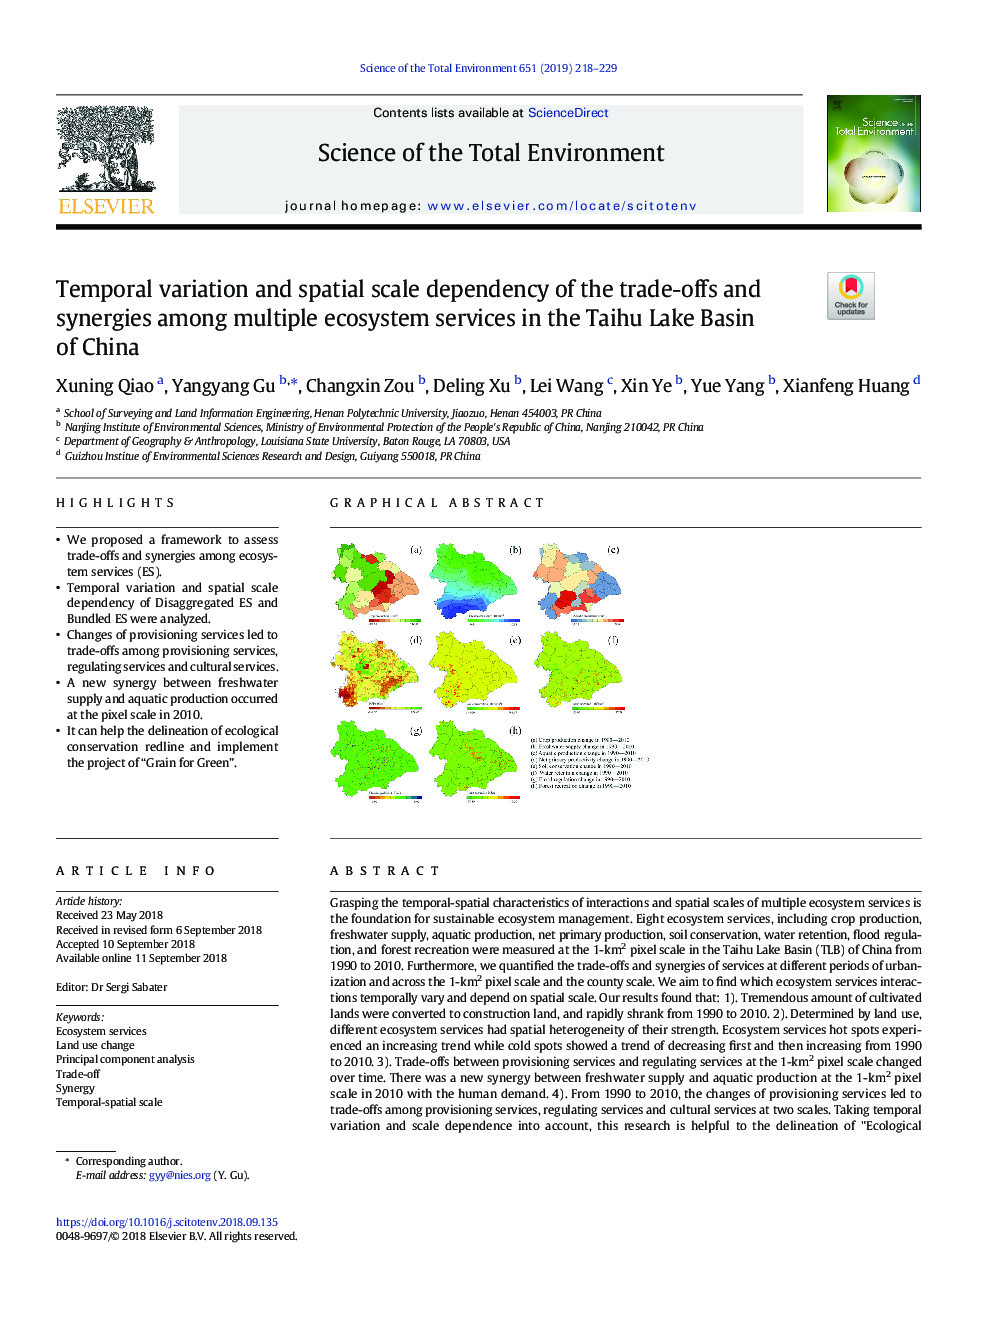 Temporal variation and spatial scale dependency of the trade-offs and synergies among multiple ecosystem services in the Taihu Lake Basin of China